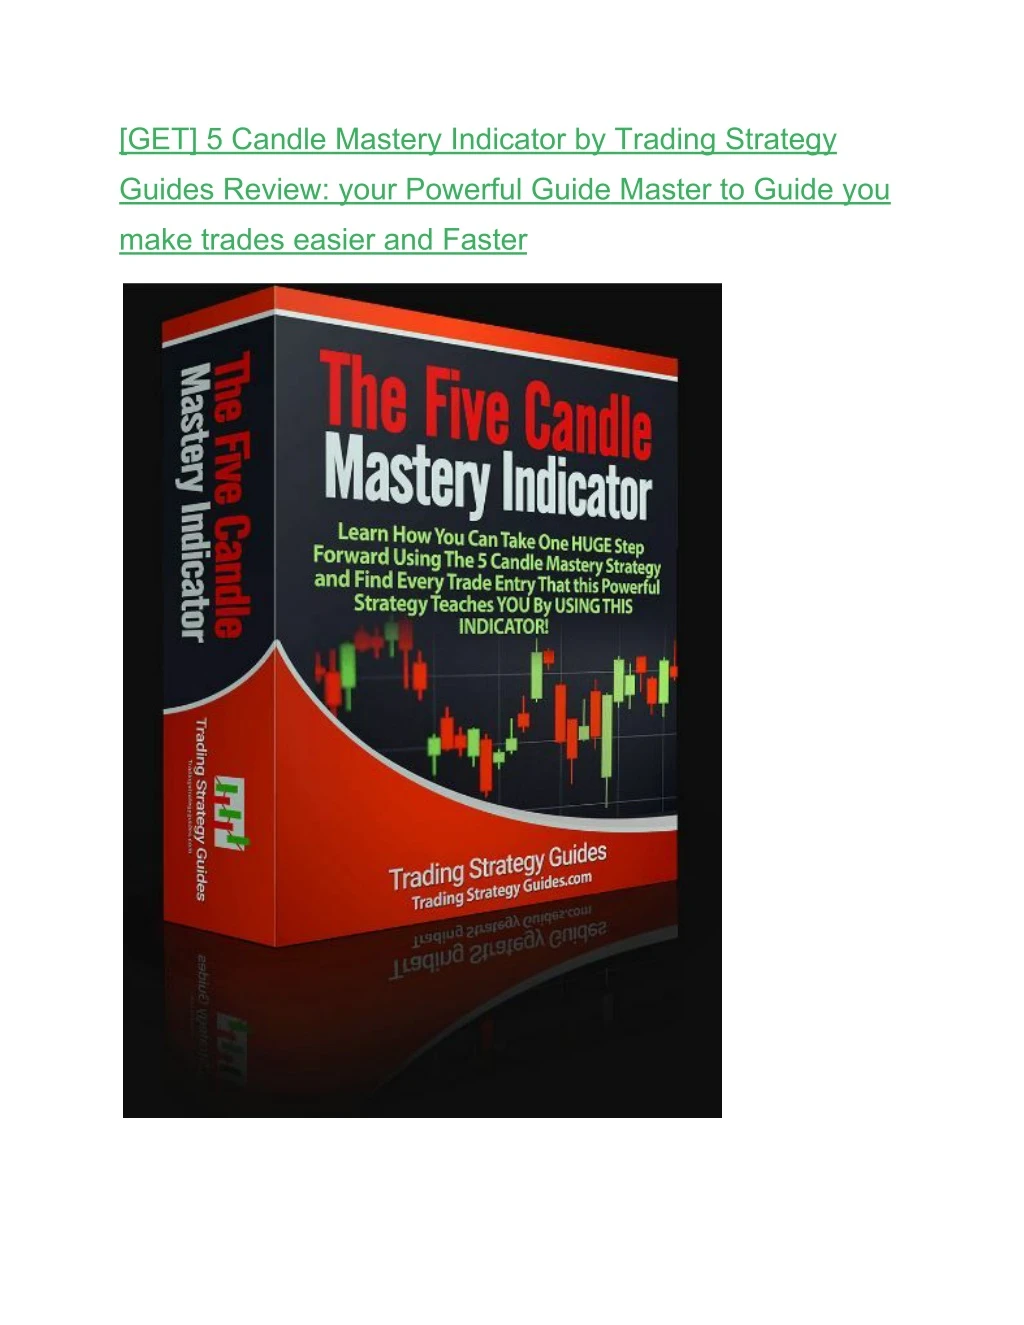 get 5 candle mastery indicator by trading strategy